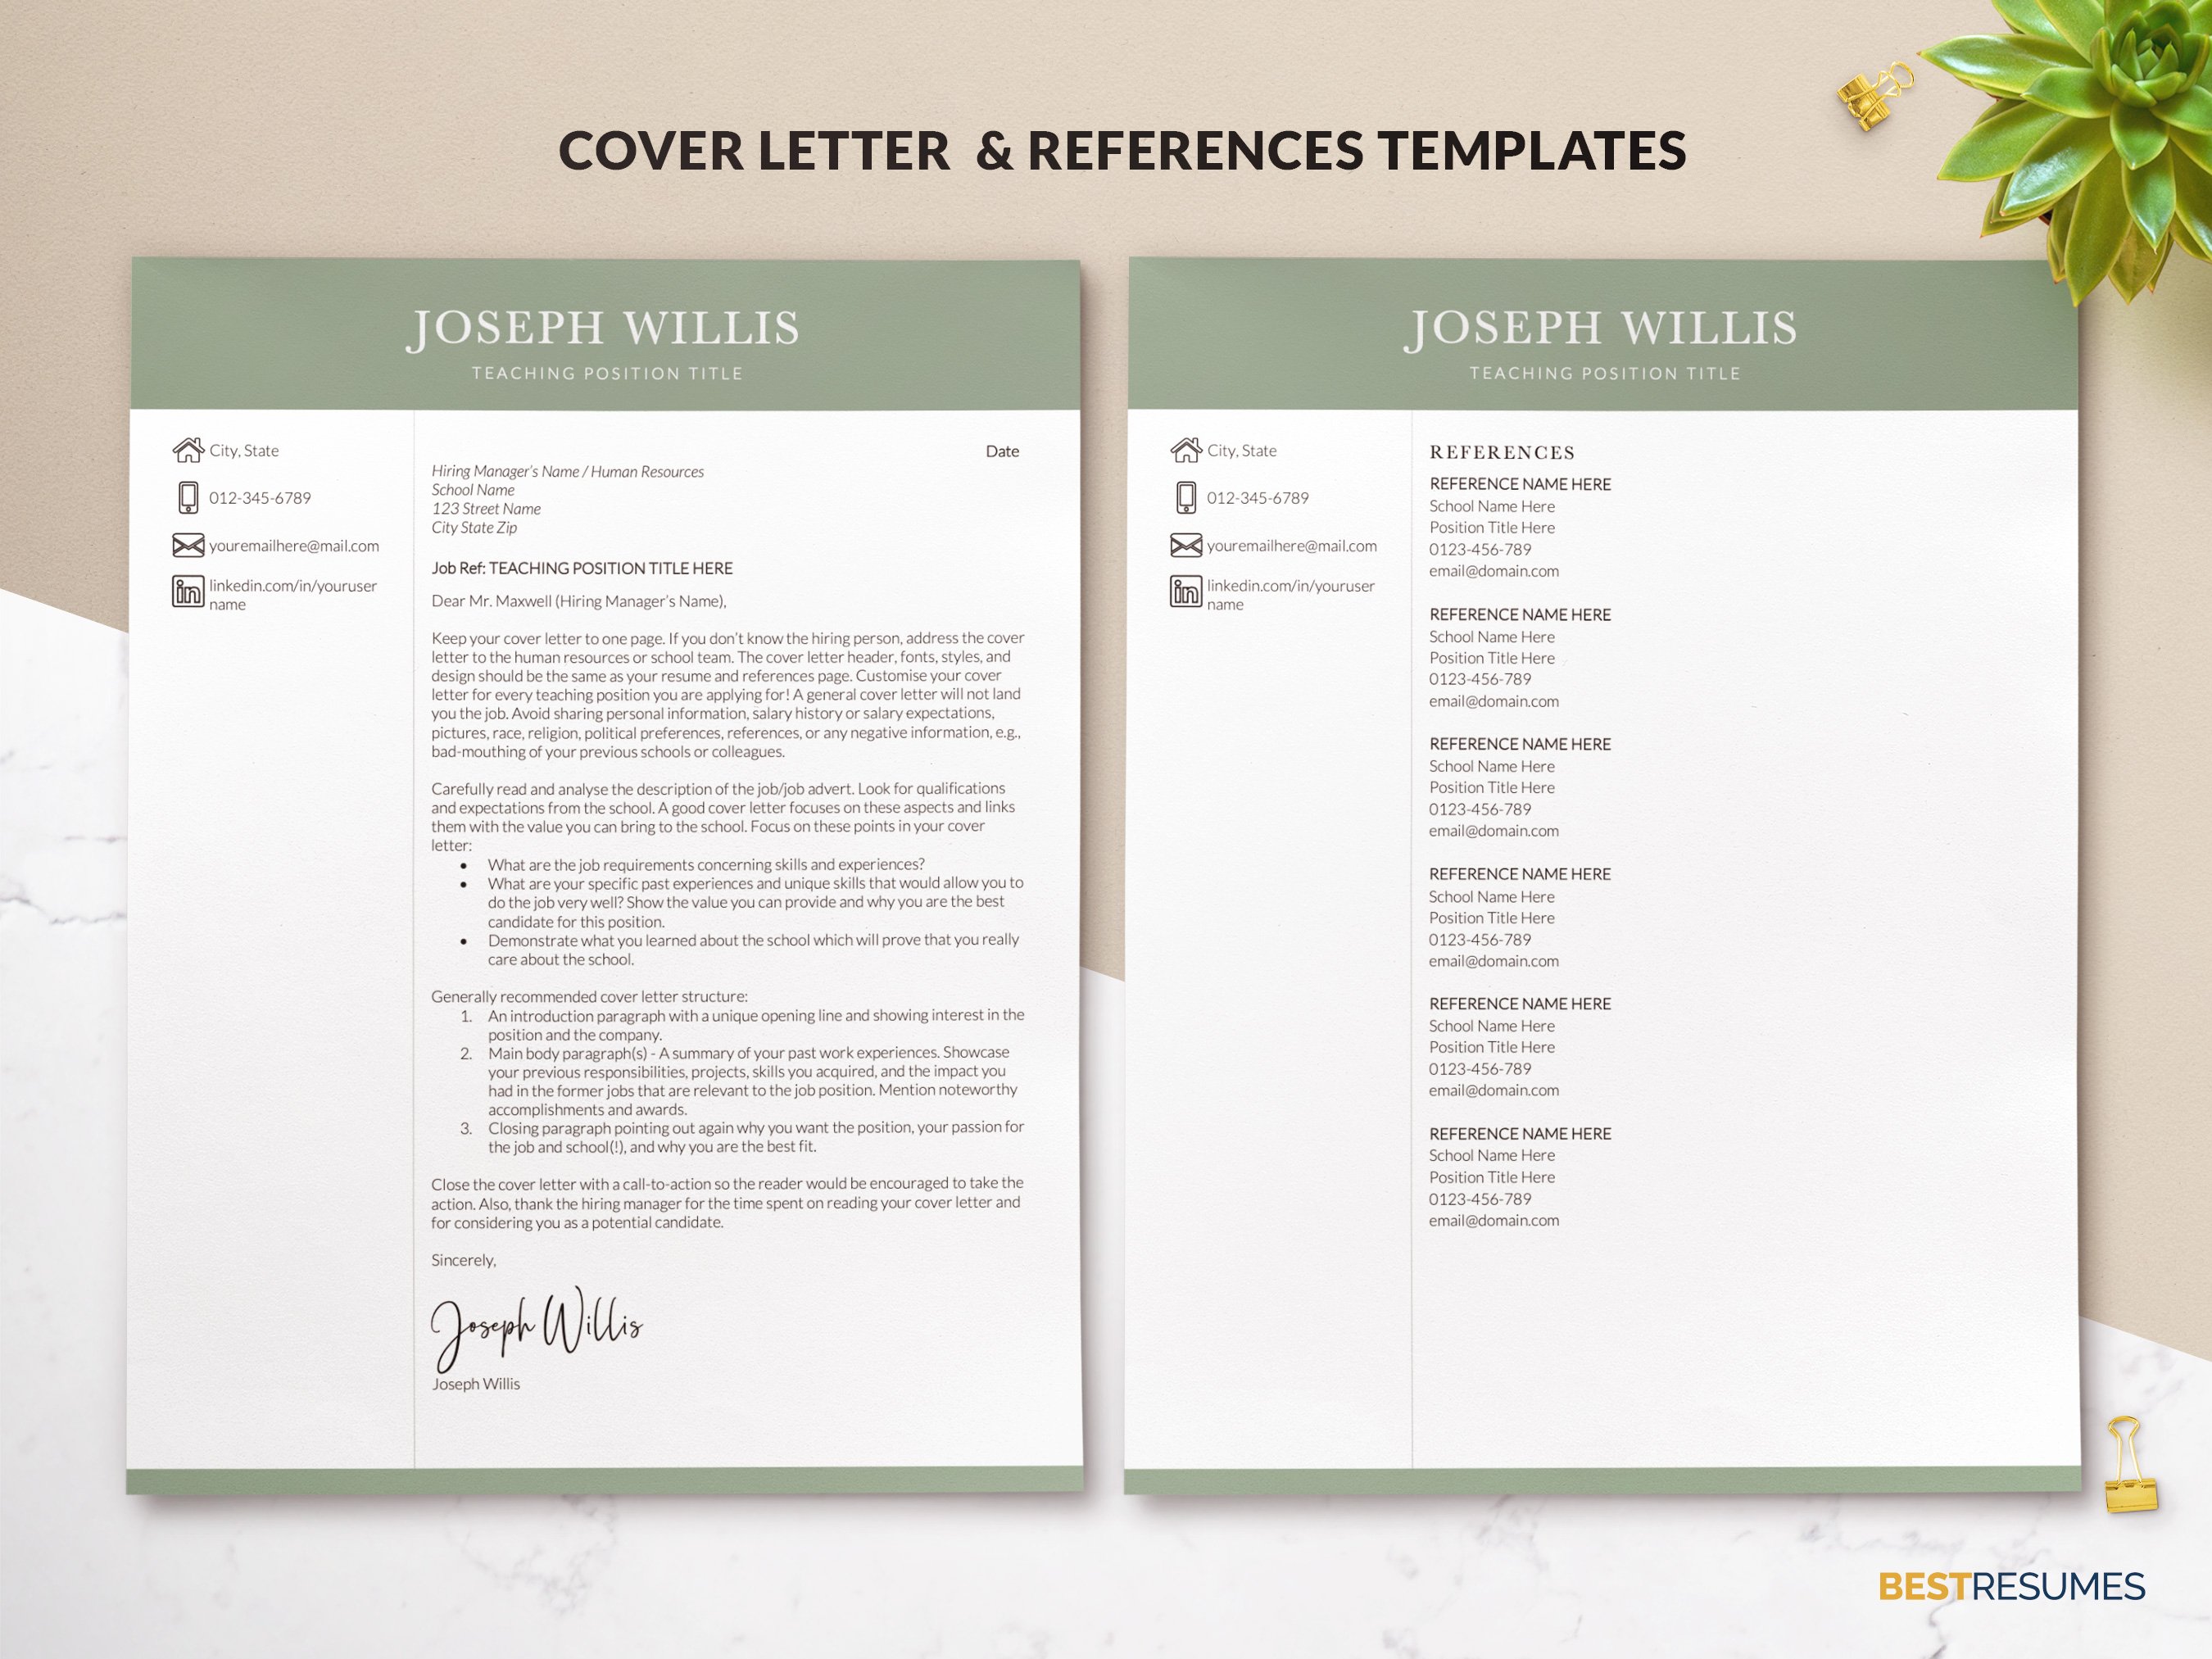 teachers resume template cover letter references page joseph willis 747